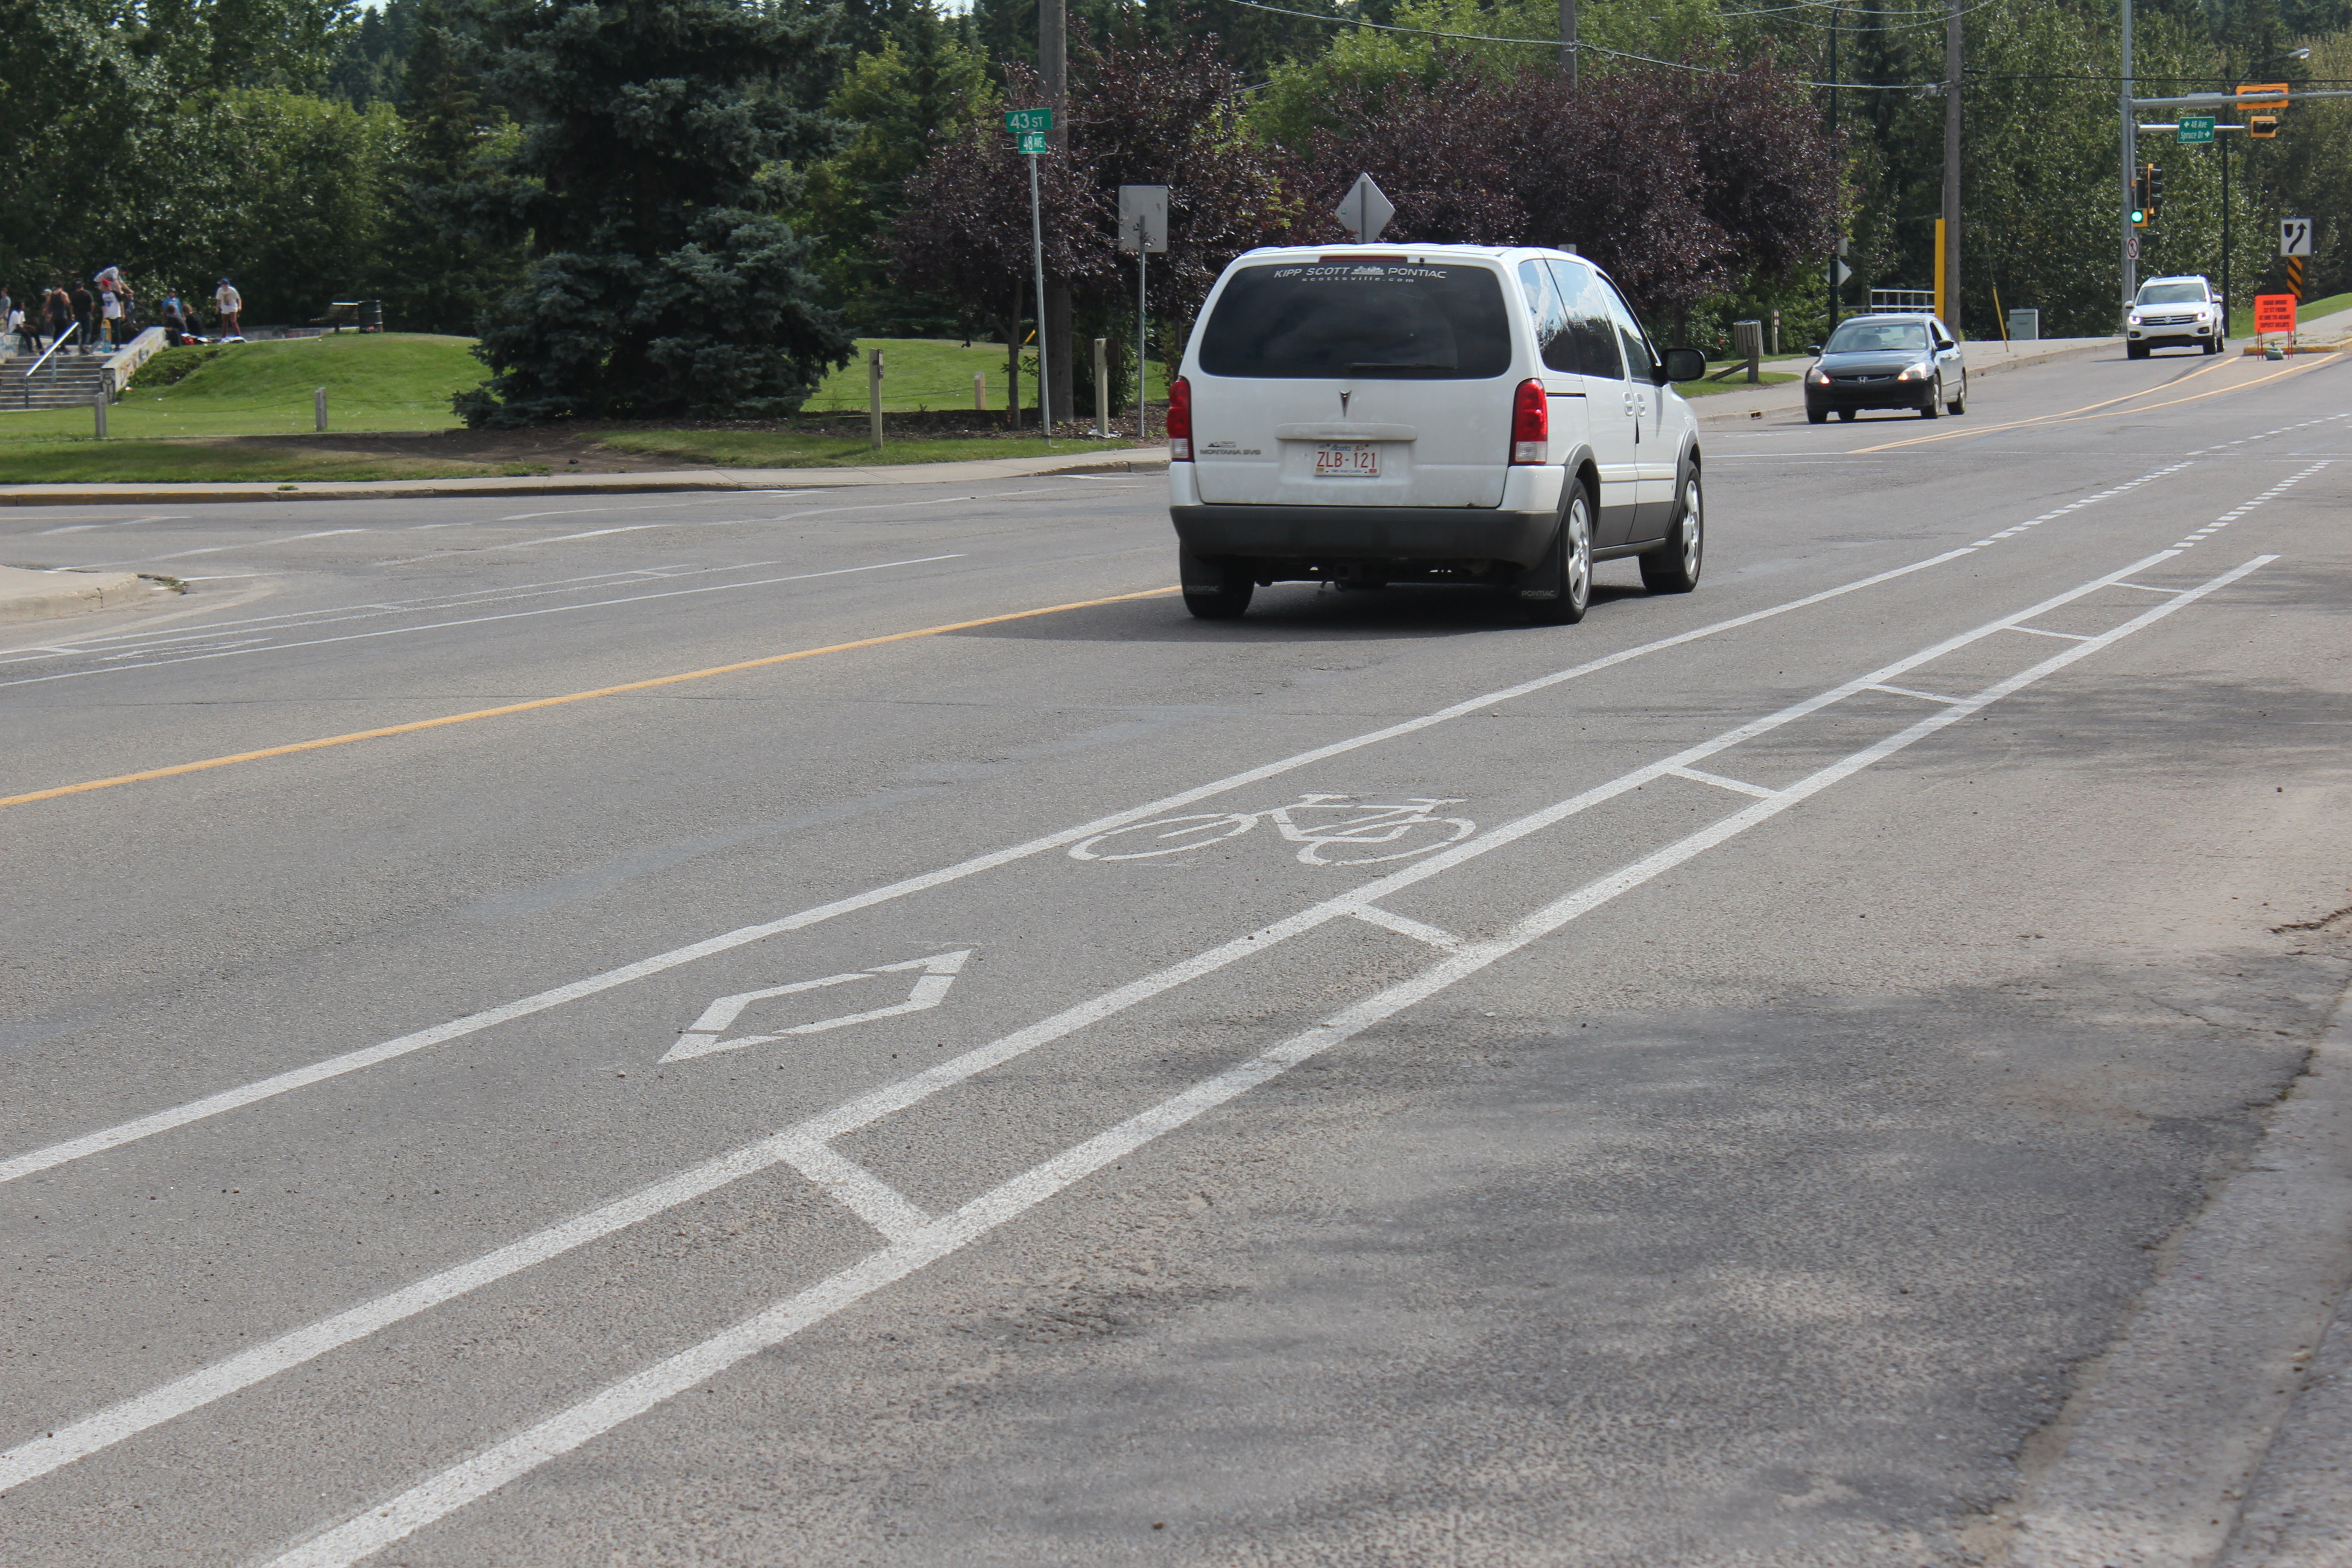 NEW ROUTES - Local drivers continue to adjust to newly-installed bike lanes throughout the City.